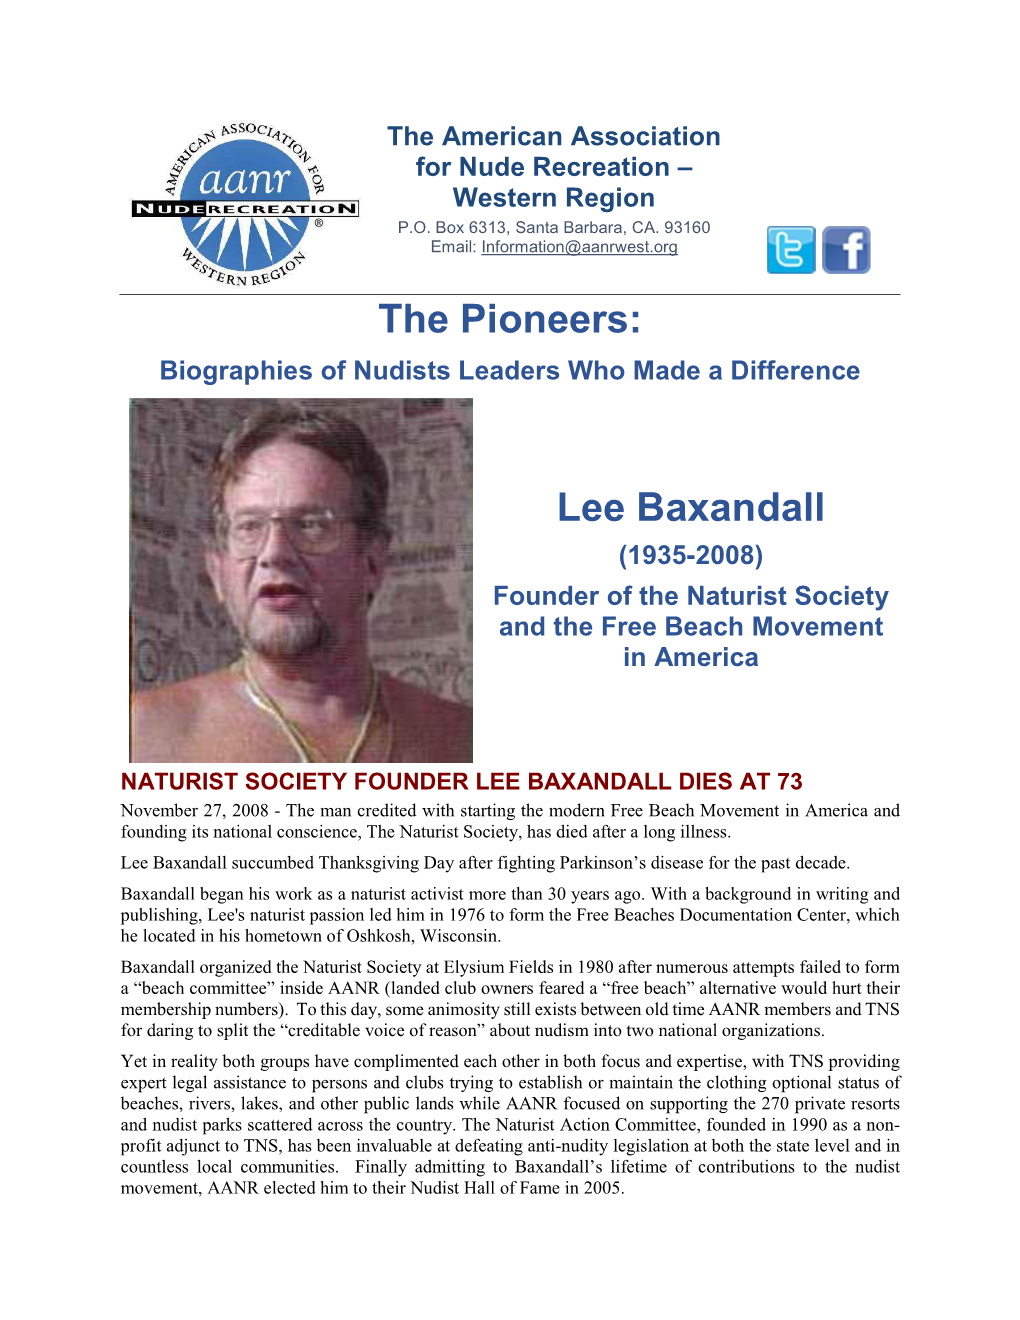 Lee Baxandall (1935-2008) Founder of the Naturist Society and the Free Beach Movement in America